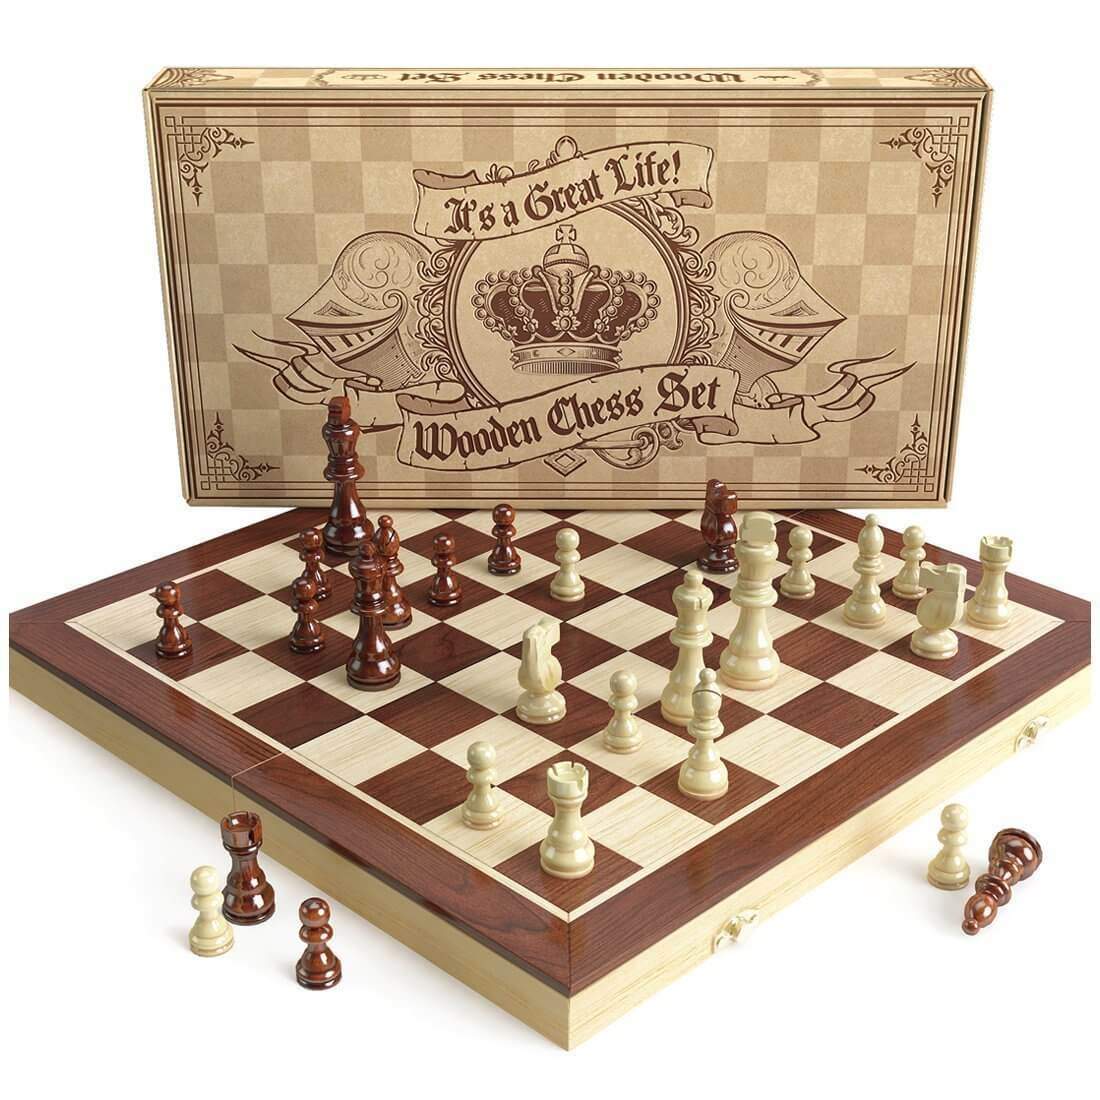 aGreatLife Universal Standard Wooden Chess Board Game Set